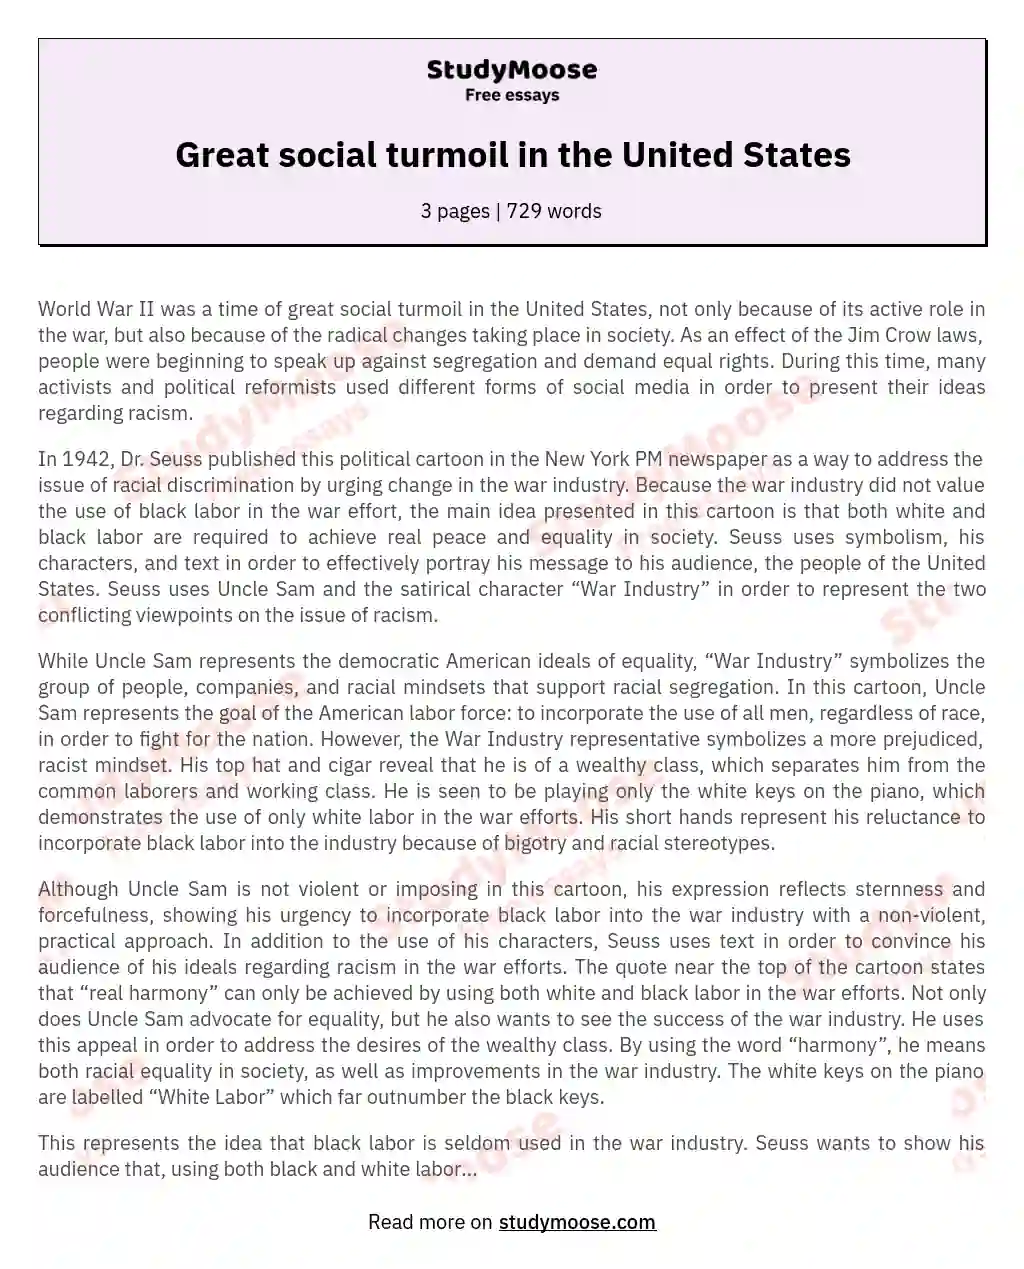 Great social turmoil in the United States essay